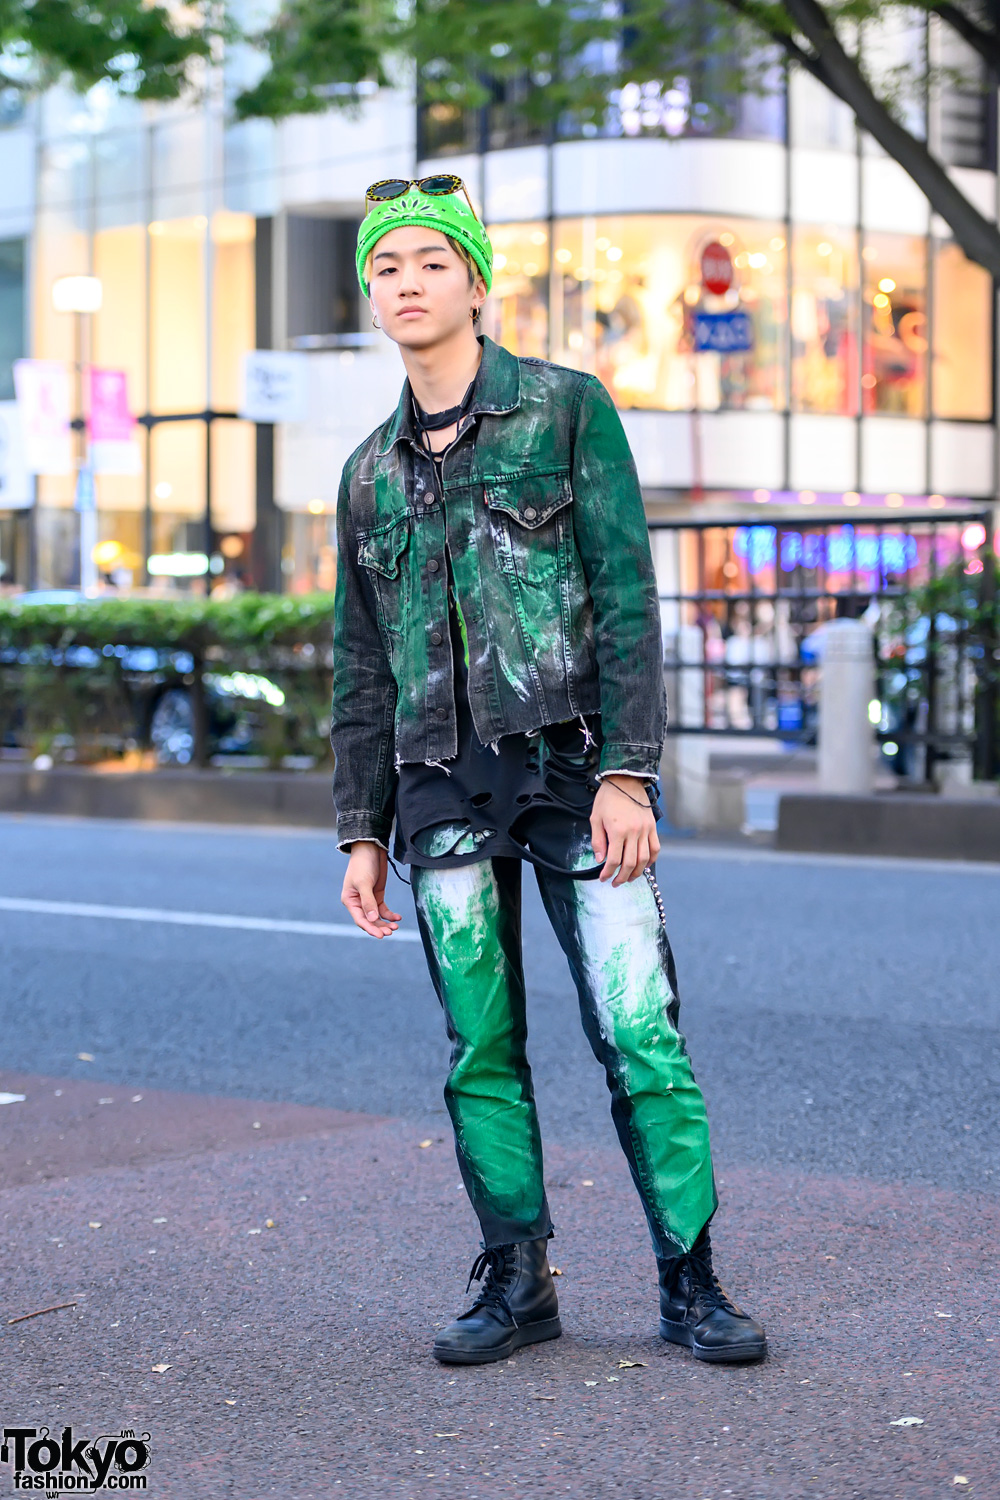 The Joker Inspired Harajuku Street Style Featuring Hand-Painted Denim Jacket & Dr. Martens